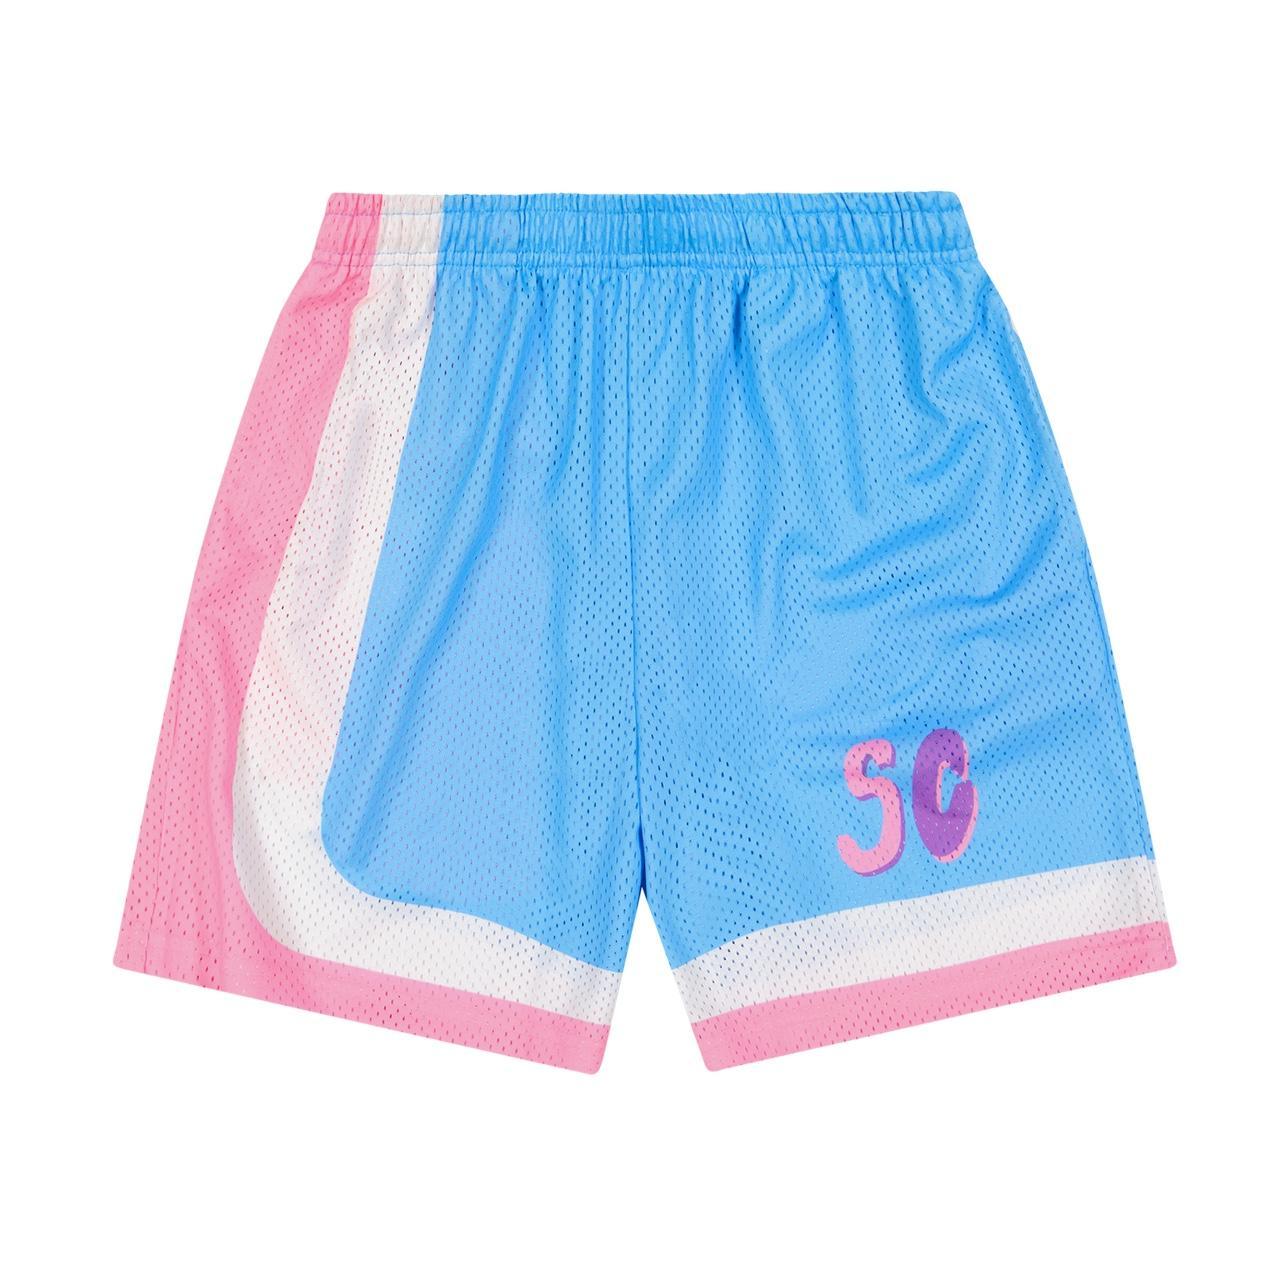 STAY COOL NYC Men's Multi Shorts (3)